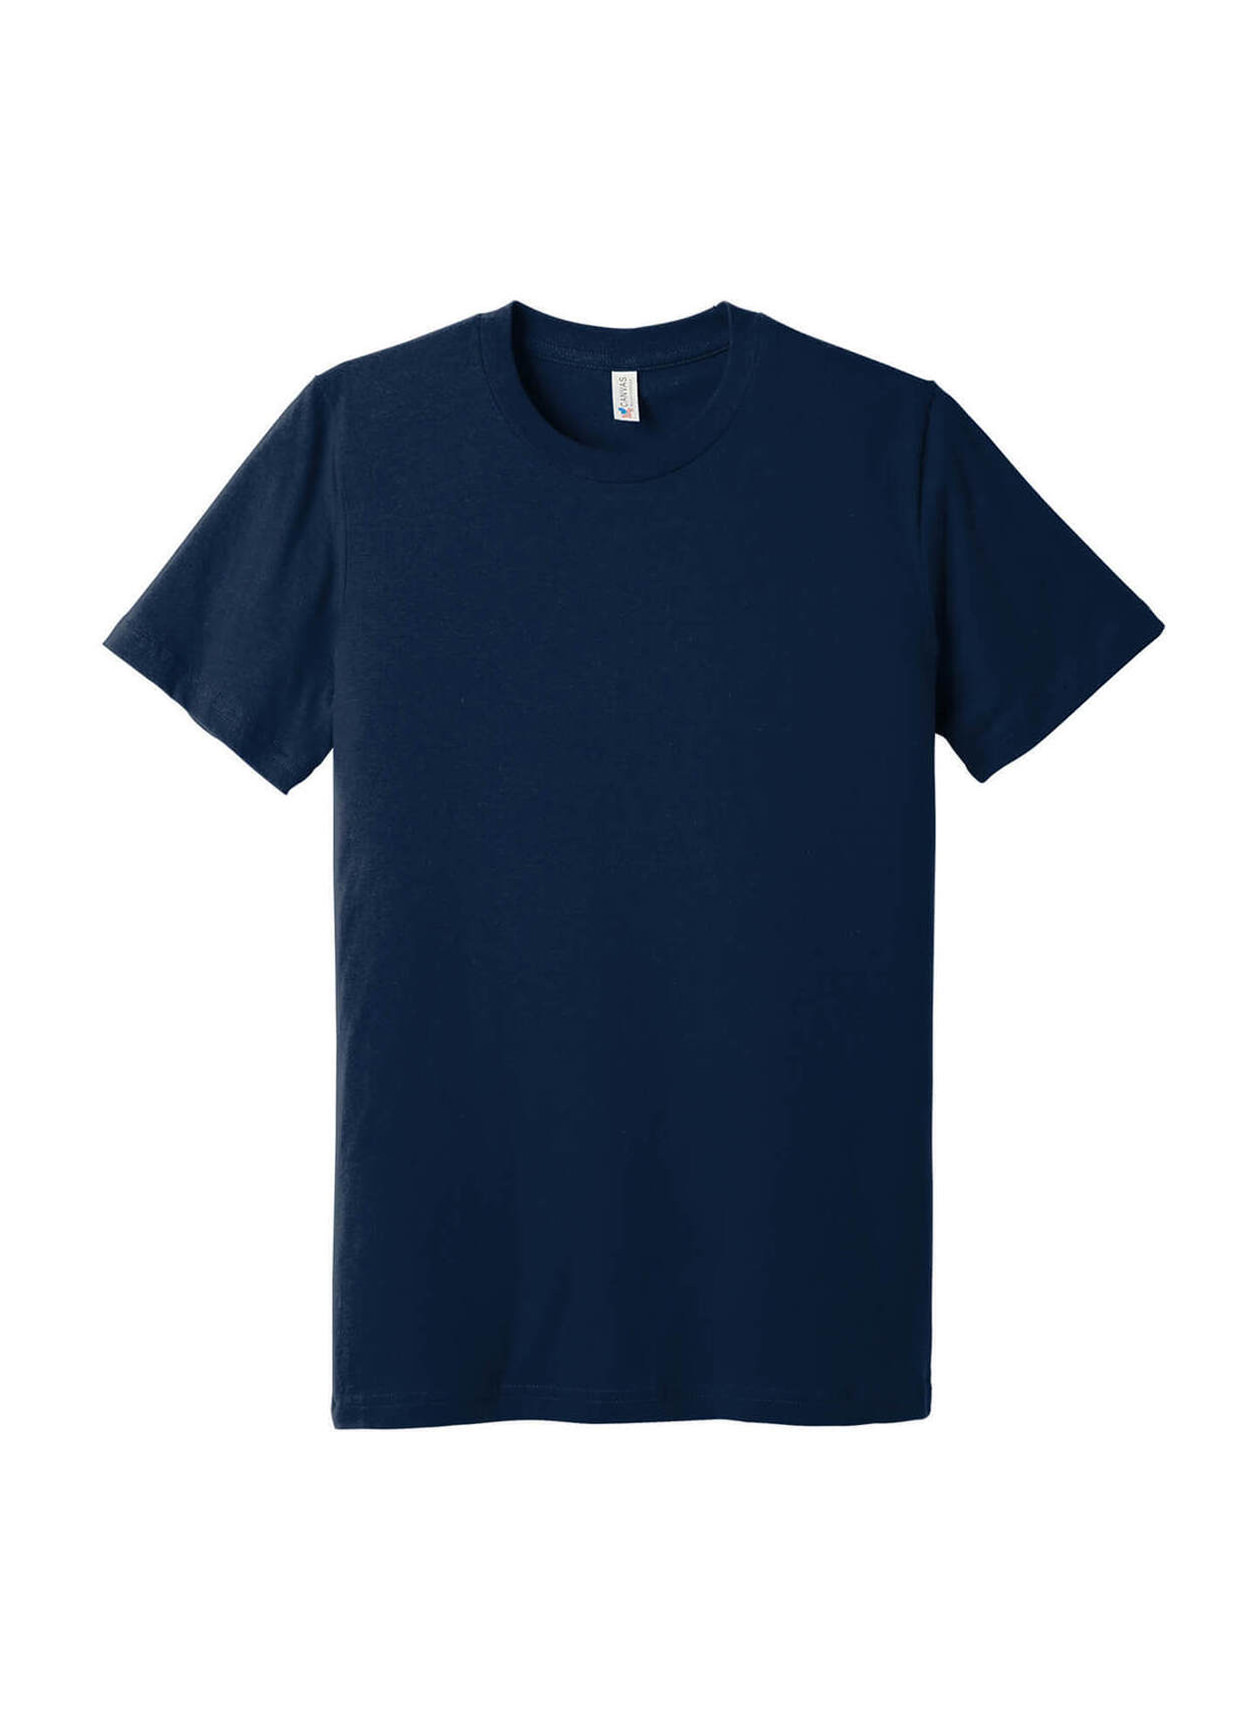 Bella + Canvas Men's Navy Made In The USA Jersey T-Shirt